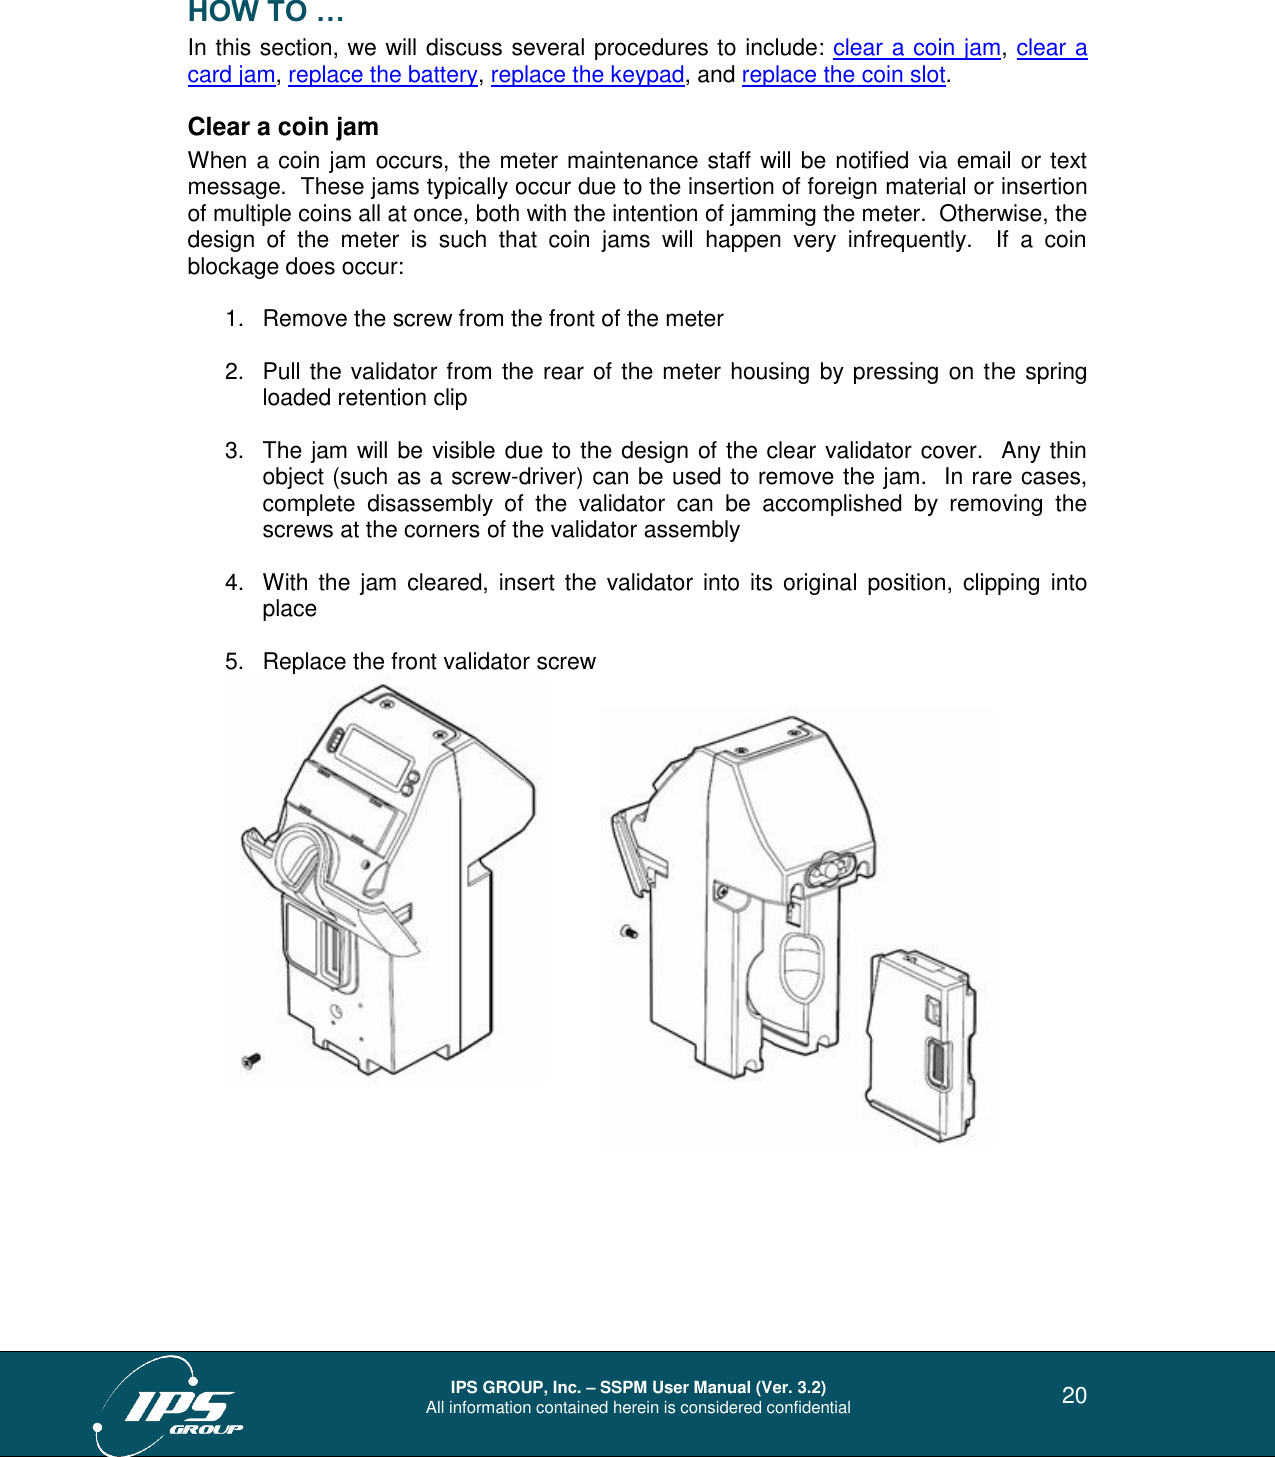  IPS GROUP, Inc. – SSPM User Manual (Ver. 3.2) All information contained herein is considered confidential   20 HOW TO … In this section, we will discuss several procedures to include: clear a coin jam, clear a card jam, replace the battery, replace the keypad, and replace the coin slot. Clear a coin jam When a coin jam occurs, the meter maintenance staff will be notified via email or text message.  These jams typically occur due to the insertion of foreign material or insertion of multiple coins all at once, both with the intention of jamming the meter.  Otherwise, the design  of  the  meter  is  such  that  coin  jams  will  happen  very  infrequently.    If  a  coin blockage does occur:  1.  Remove the screw from the front of the meter    2.  Pull the validator from the rear of the meter housing by pressing on the spring loaded retention clip  3.  The jam will be visible due to the design of the clear validator cover.  Any thin object (such as a screw-driver) can be used to remove the jam.  In rare cases, complete  disassembly  of  the  validator  can  be  accomplished  by  removing  the screws at the corners of the validator assembly  4.  With the jam  cleared,  insert the  validator  into  its original  position, clipping into place  5.  Replace the front validator screw           